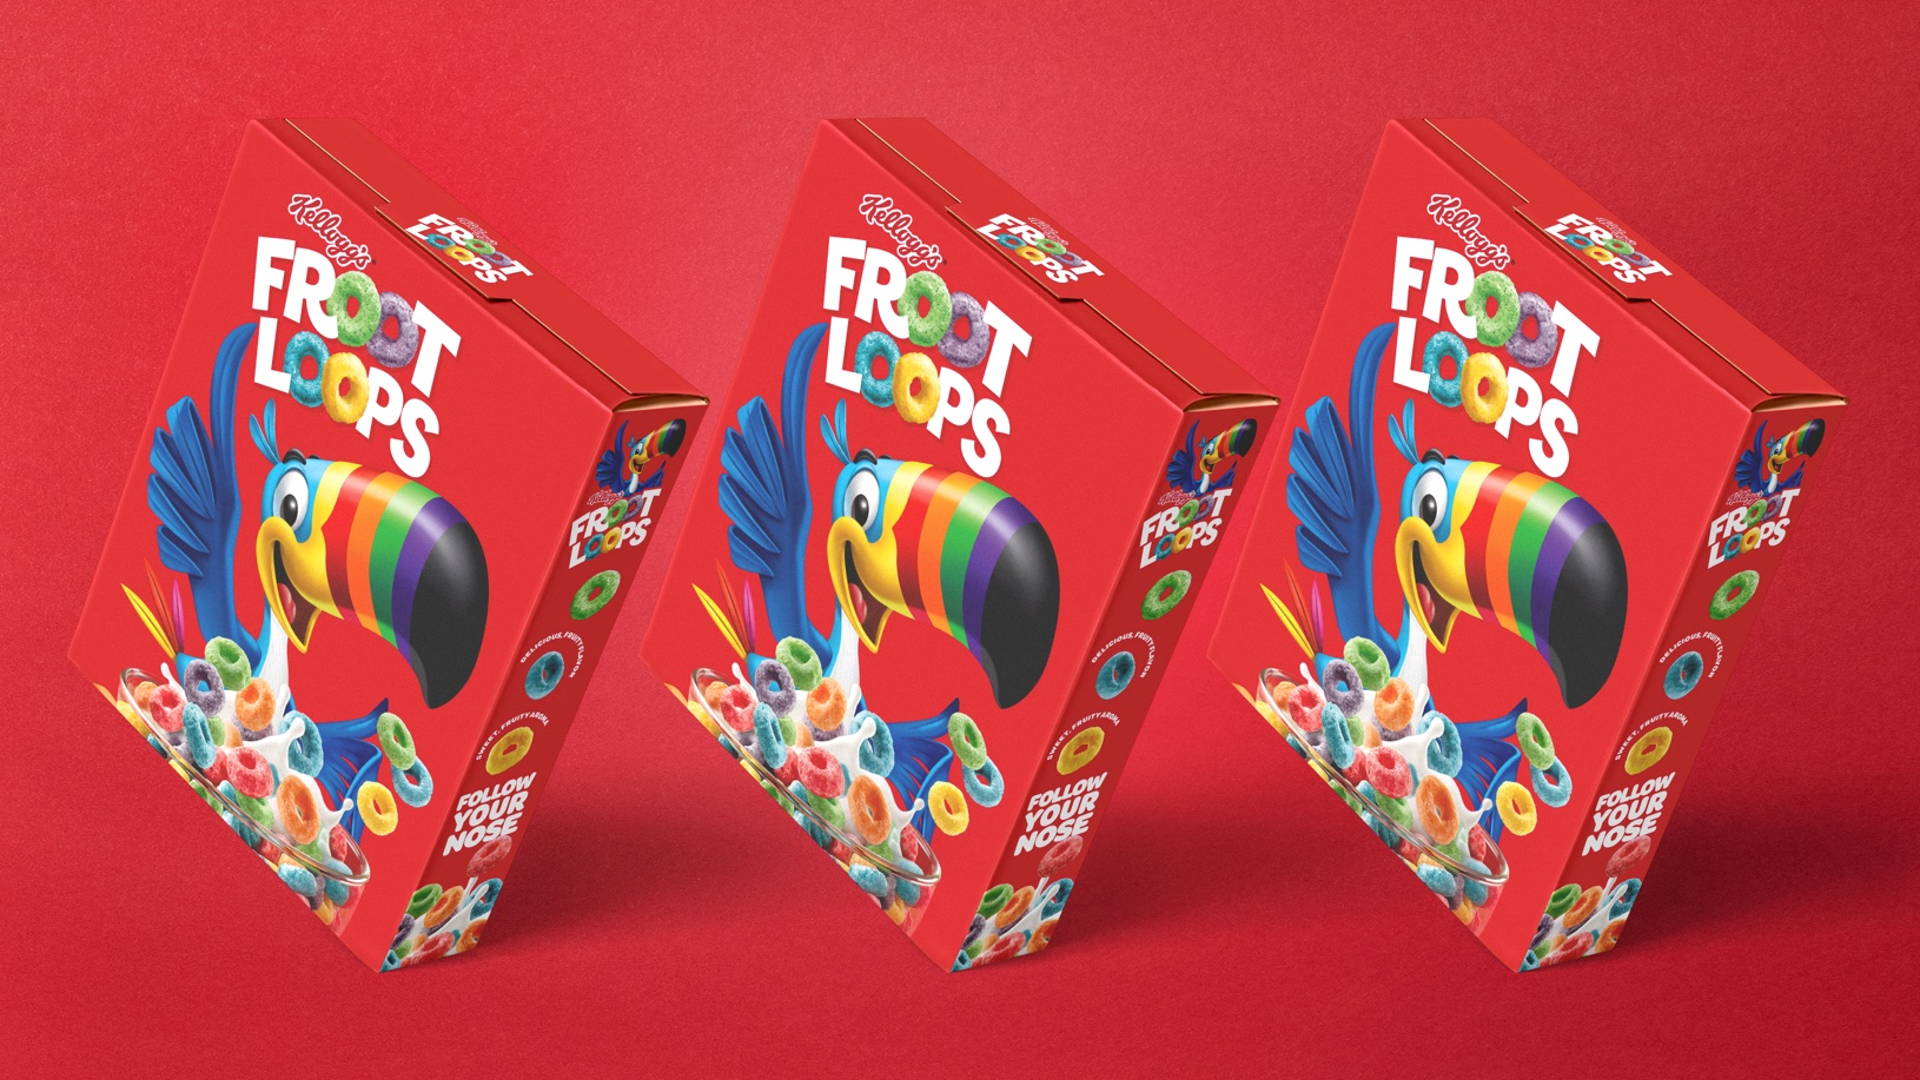 Froot Loops Integrates The Iconic And Colorful Loops Into This 'Sweet' Logo  Update